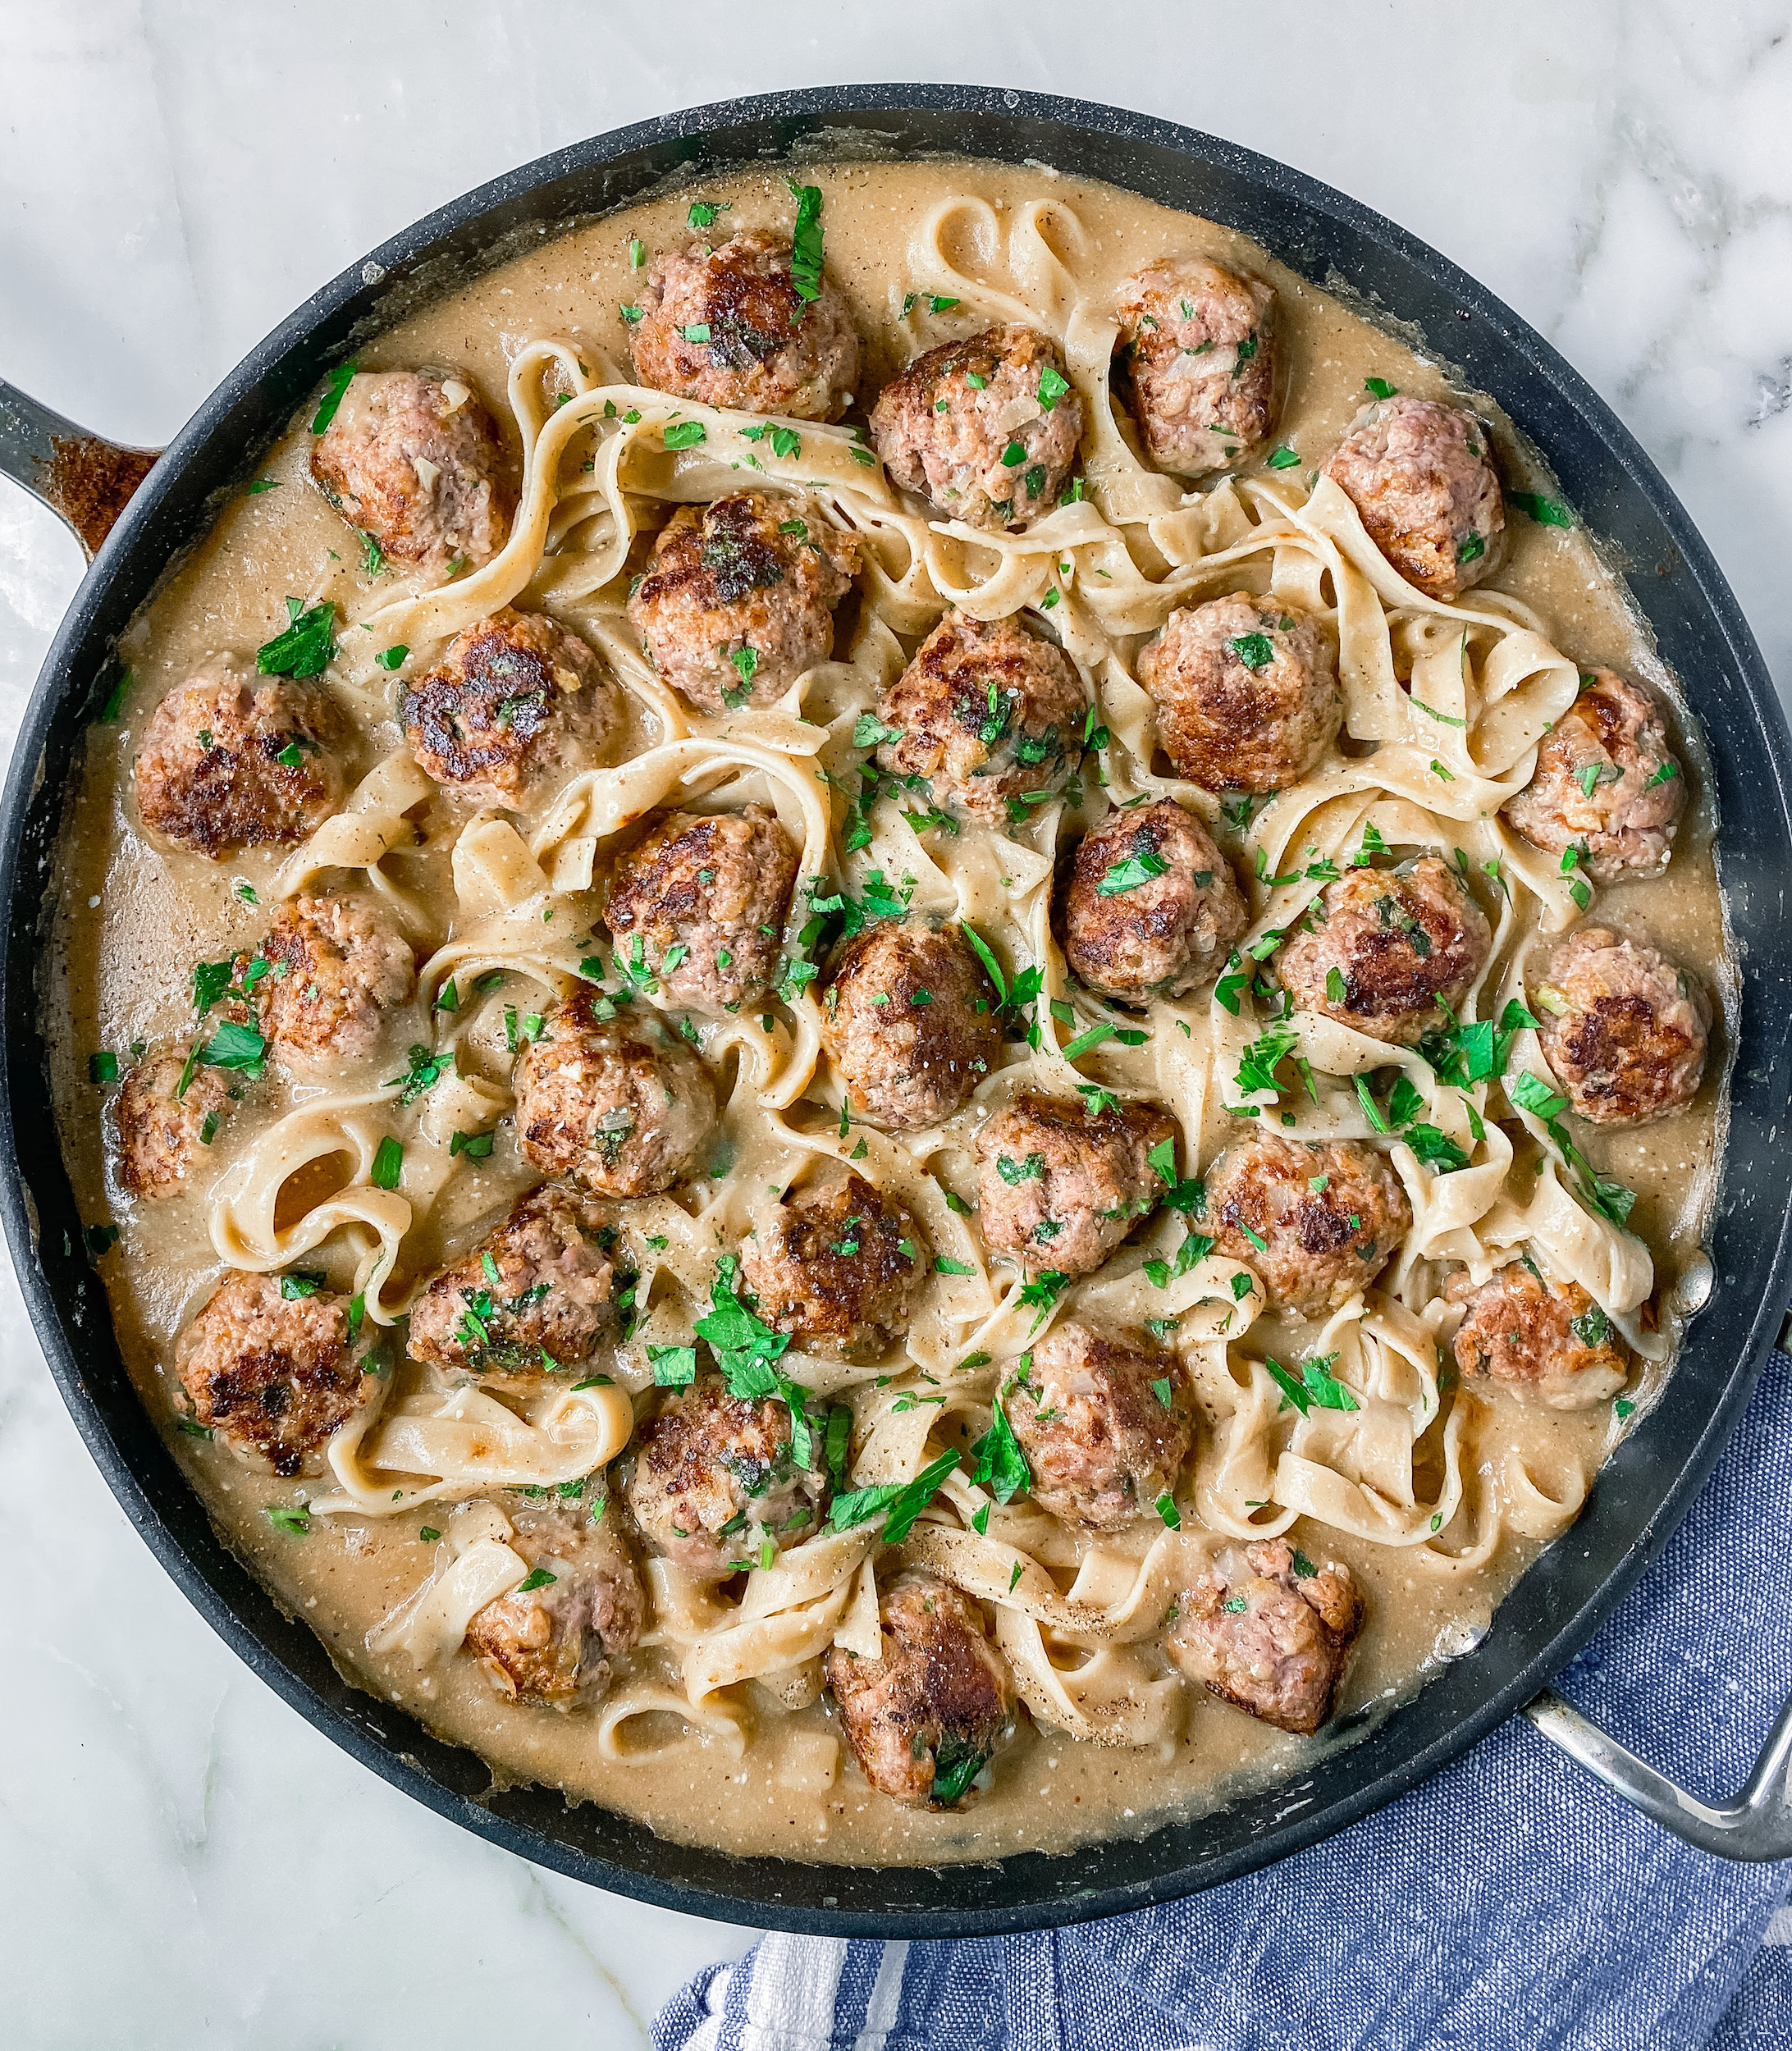 How To Make The Best Swedish Meatballs